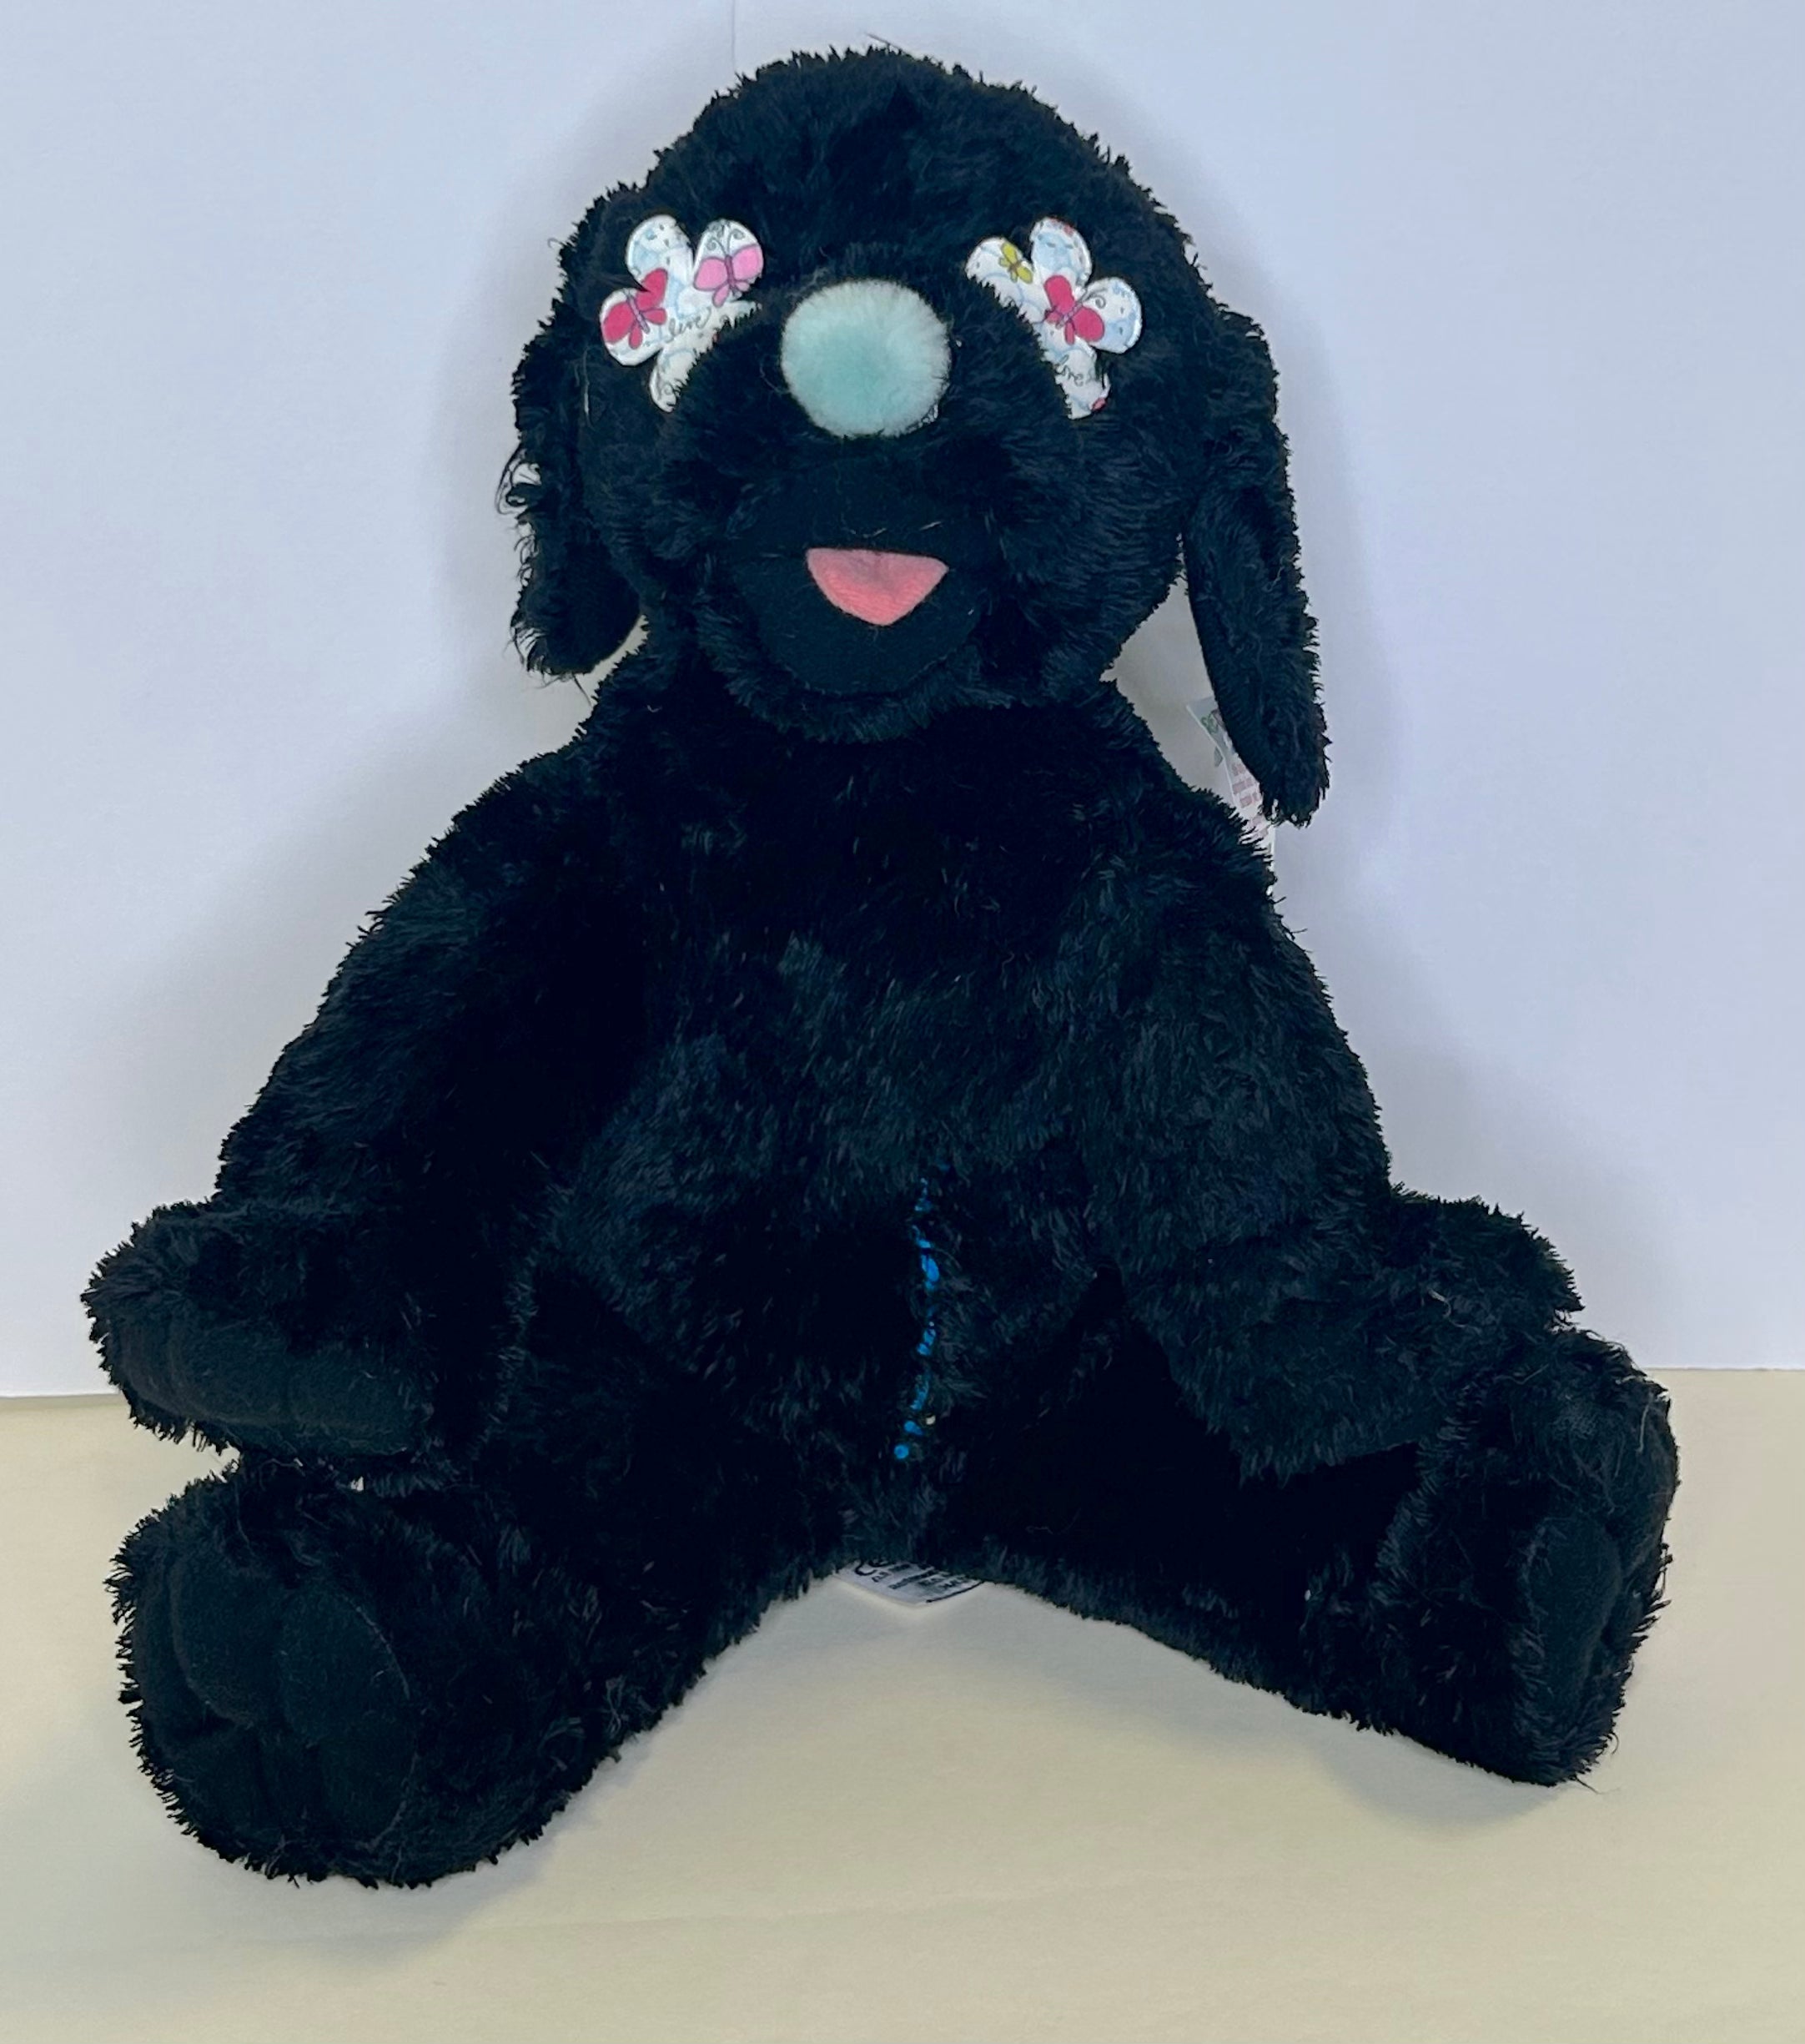 Mini Me Squeaky Breed Dog Toy: Black Mutts